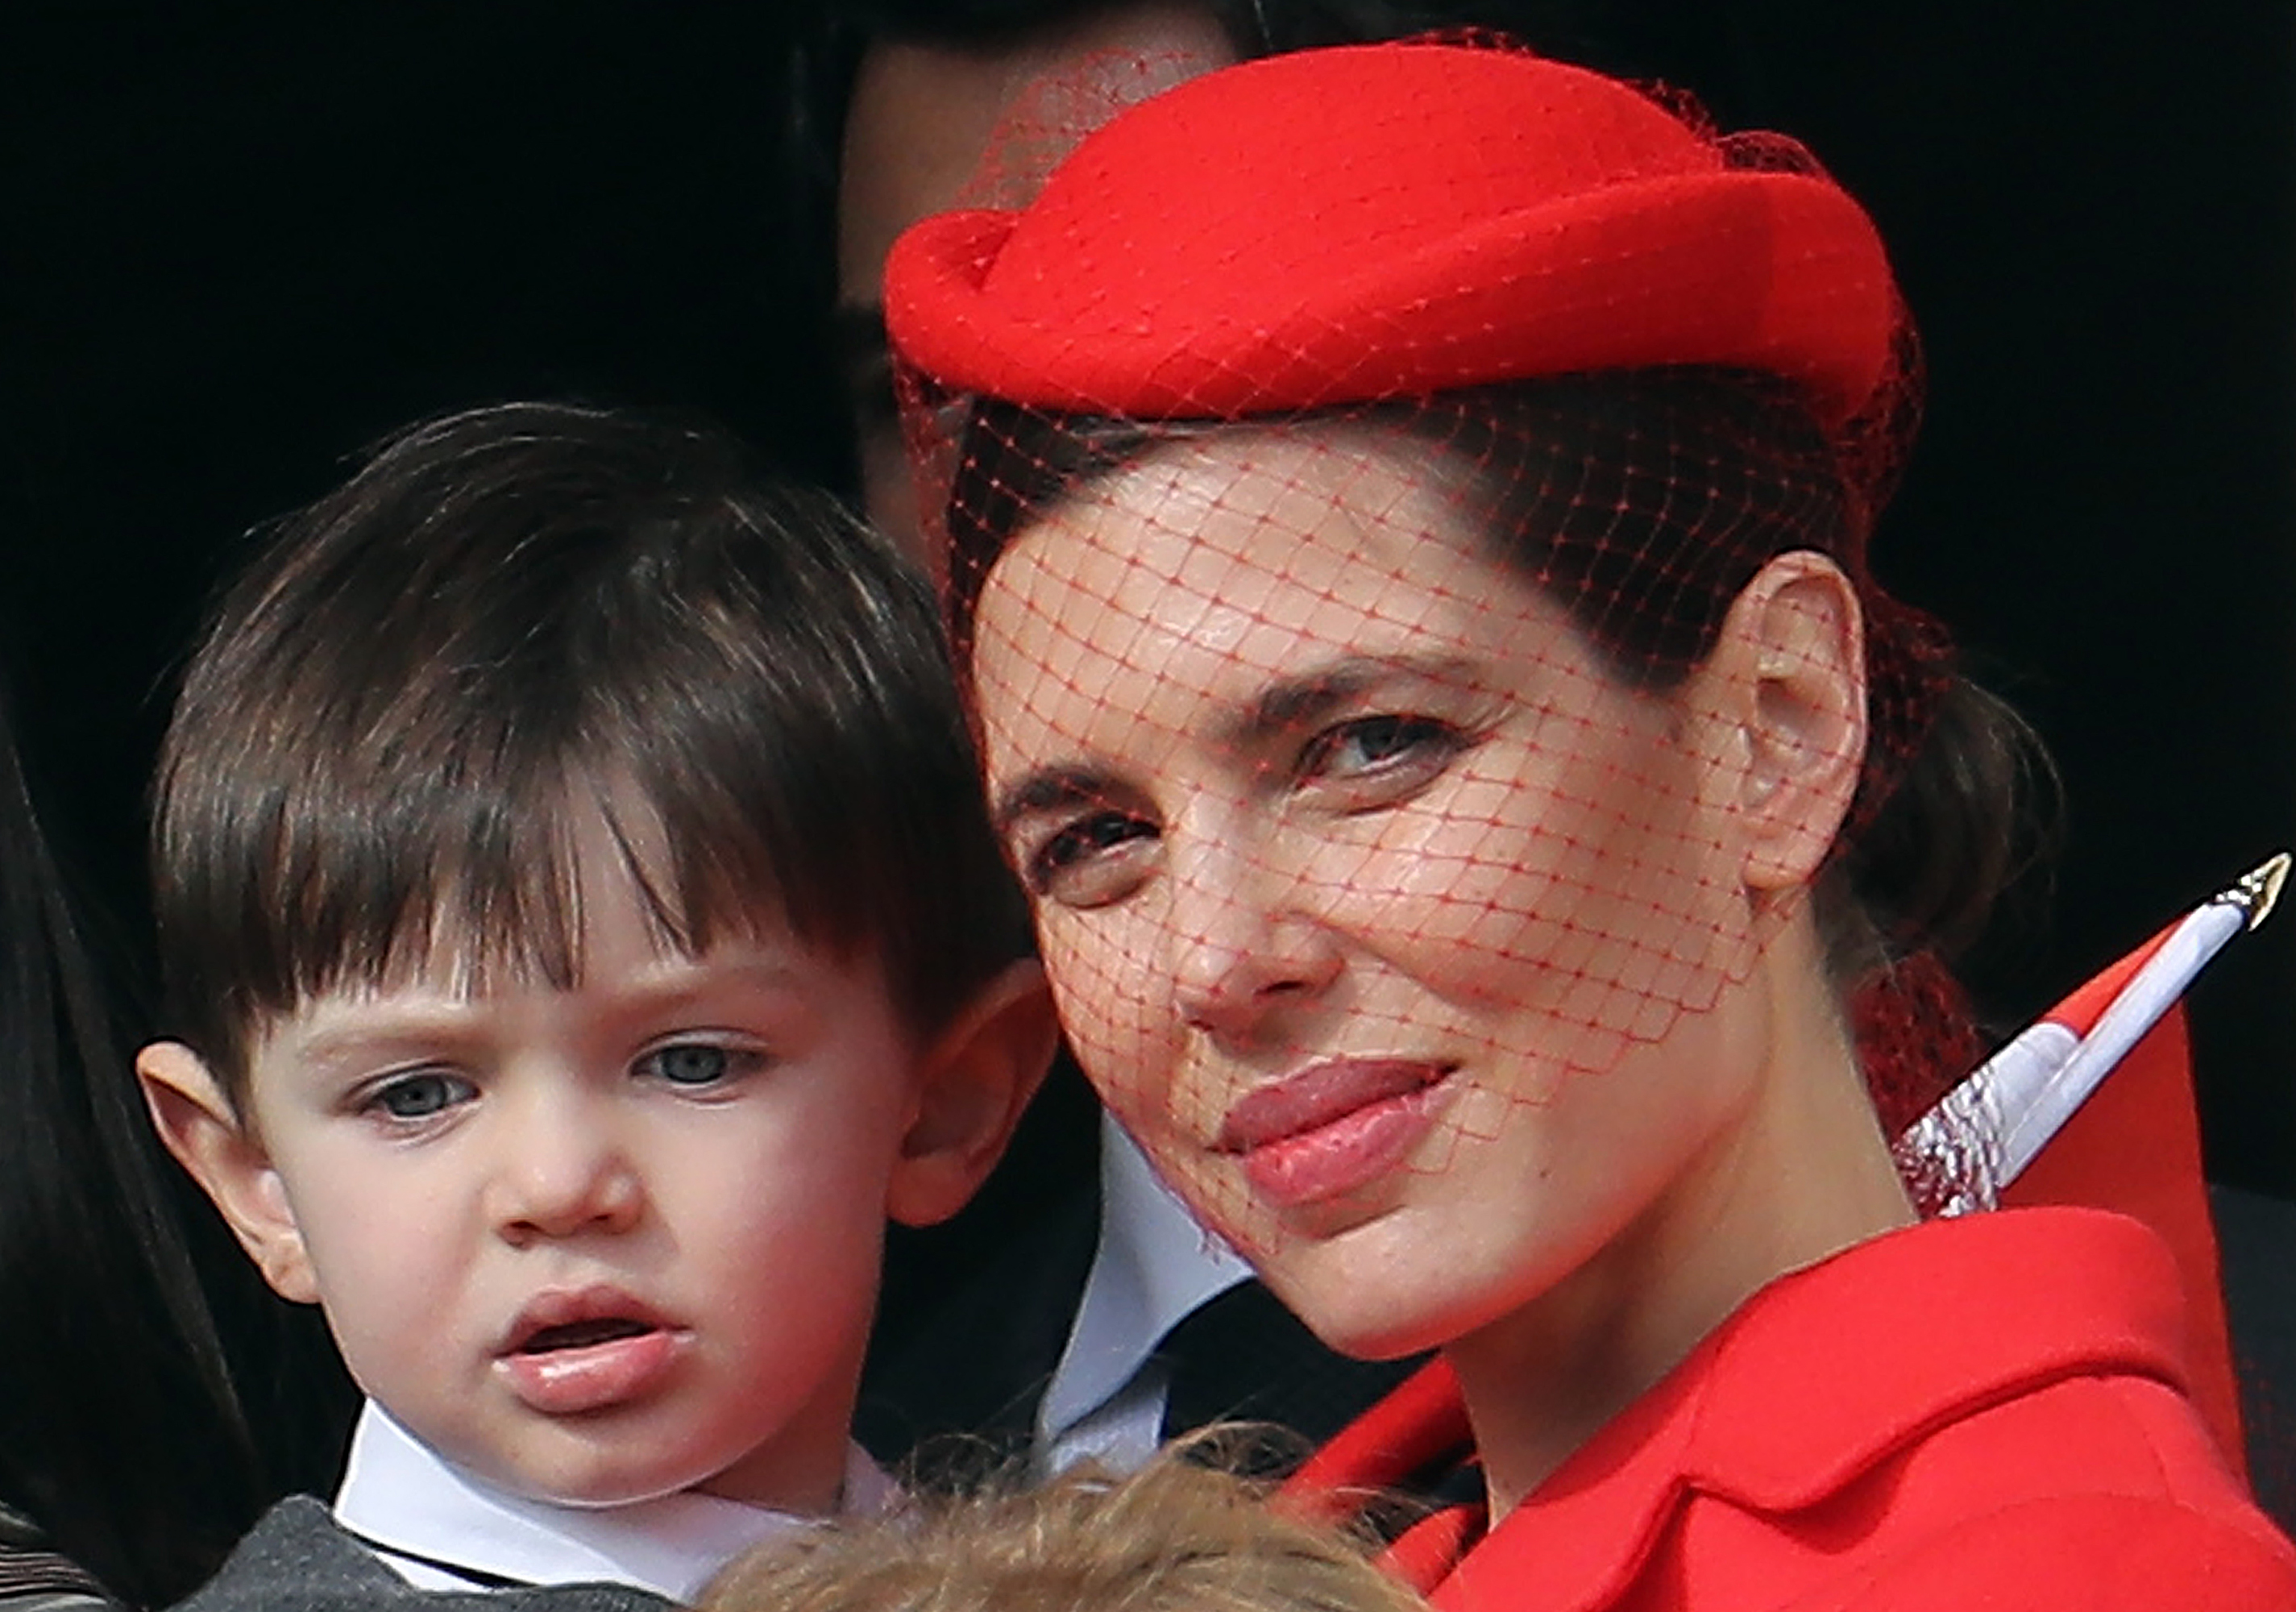 Monaco's Princess Charlotte Casiraghi (R) and her son Raphael appear on the balcony of the Monaco Palace during the celebrations marking Monaco's National Day, on November 19, 2016 in Monaco.   / AFP PHOTO / VALERY HACHE